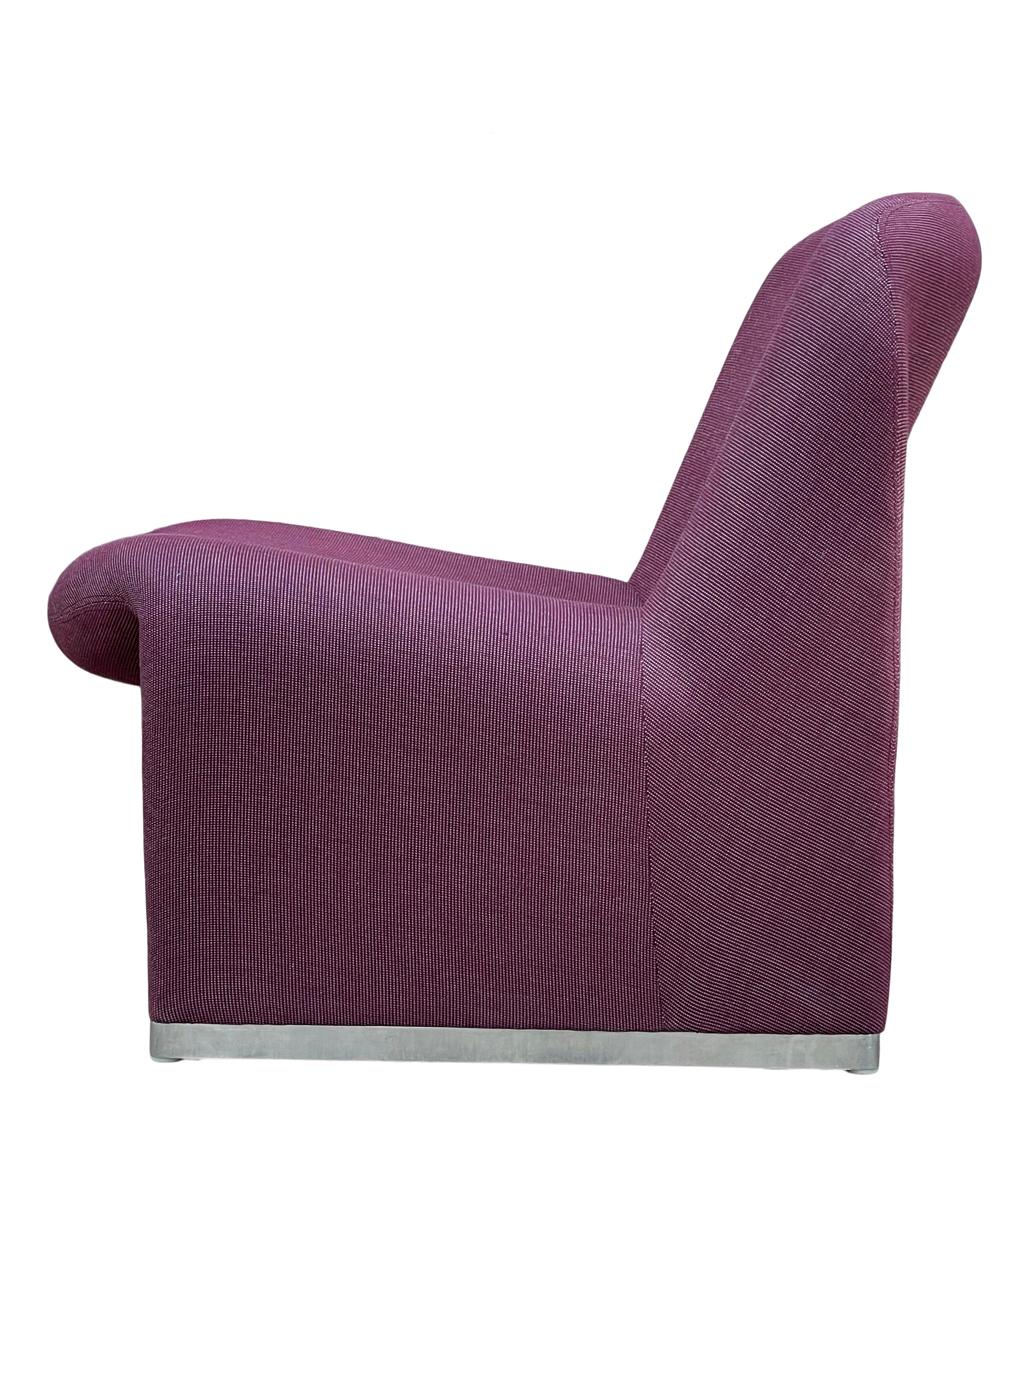 Mid-Century Modern Alky Lounge Chair by Giancarlo Piretti for Artifort 1